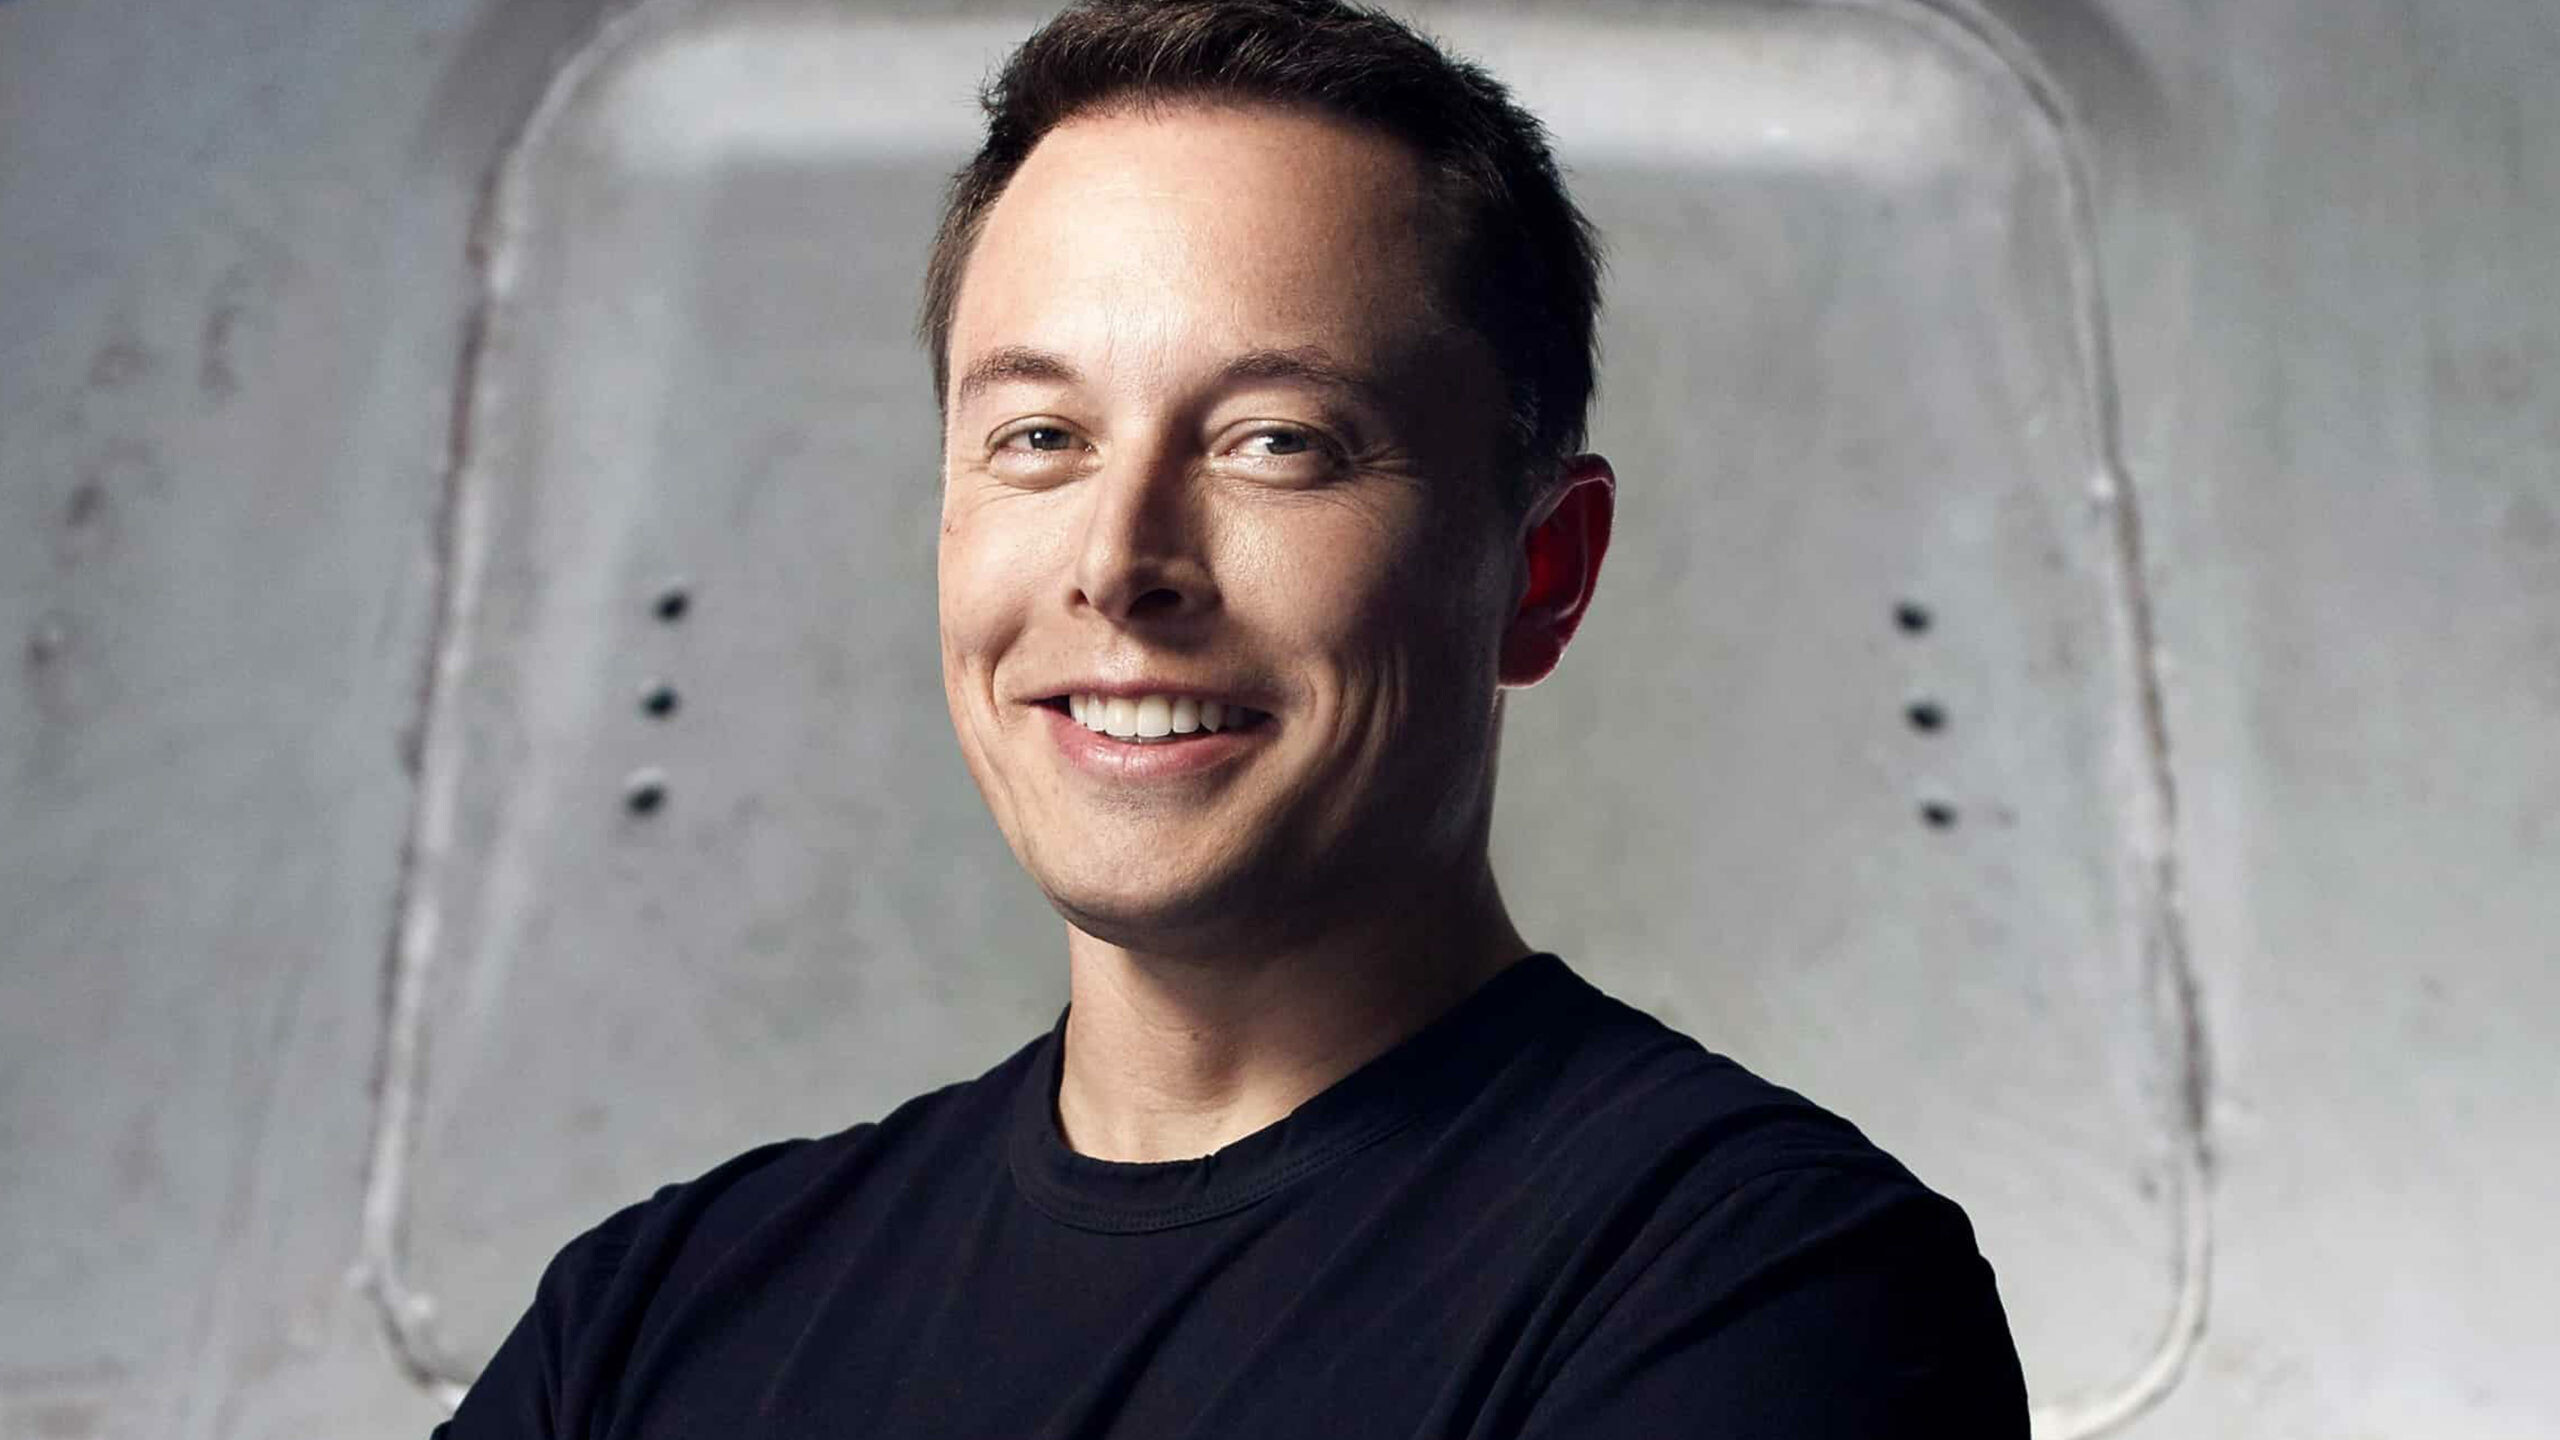 Elon Musk: The second-wealthiest person in the world. 2560x1440 HD Wallpaper.